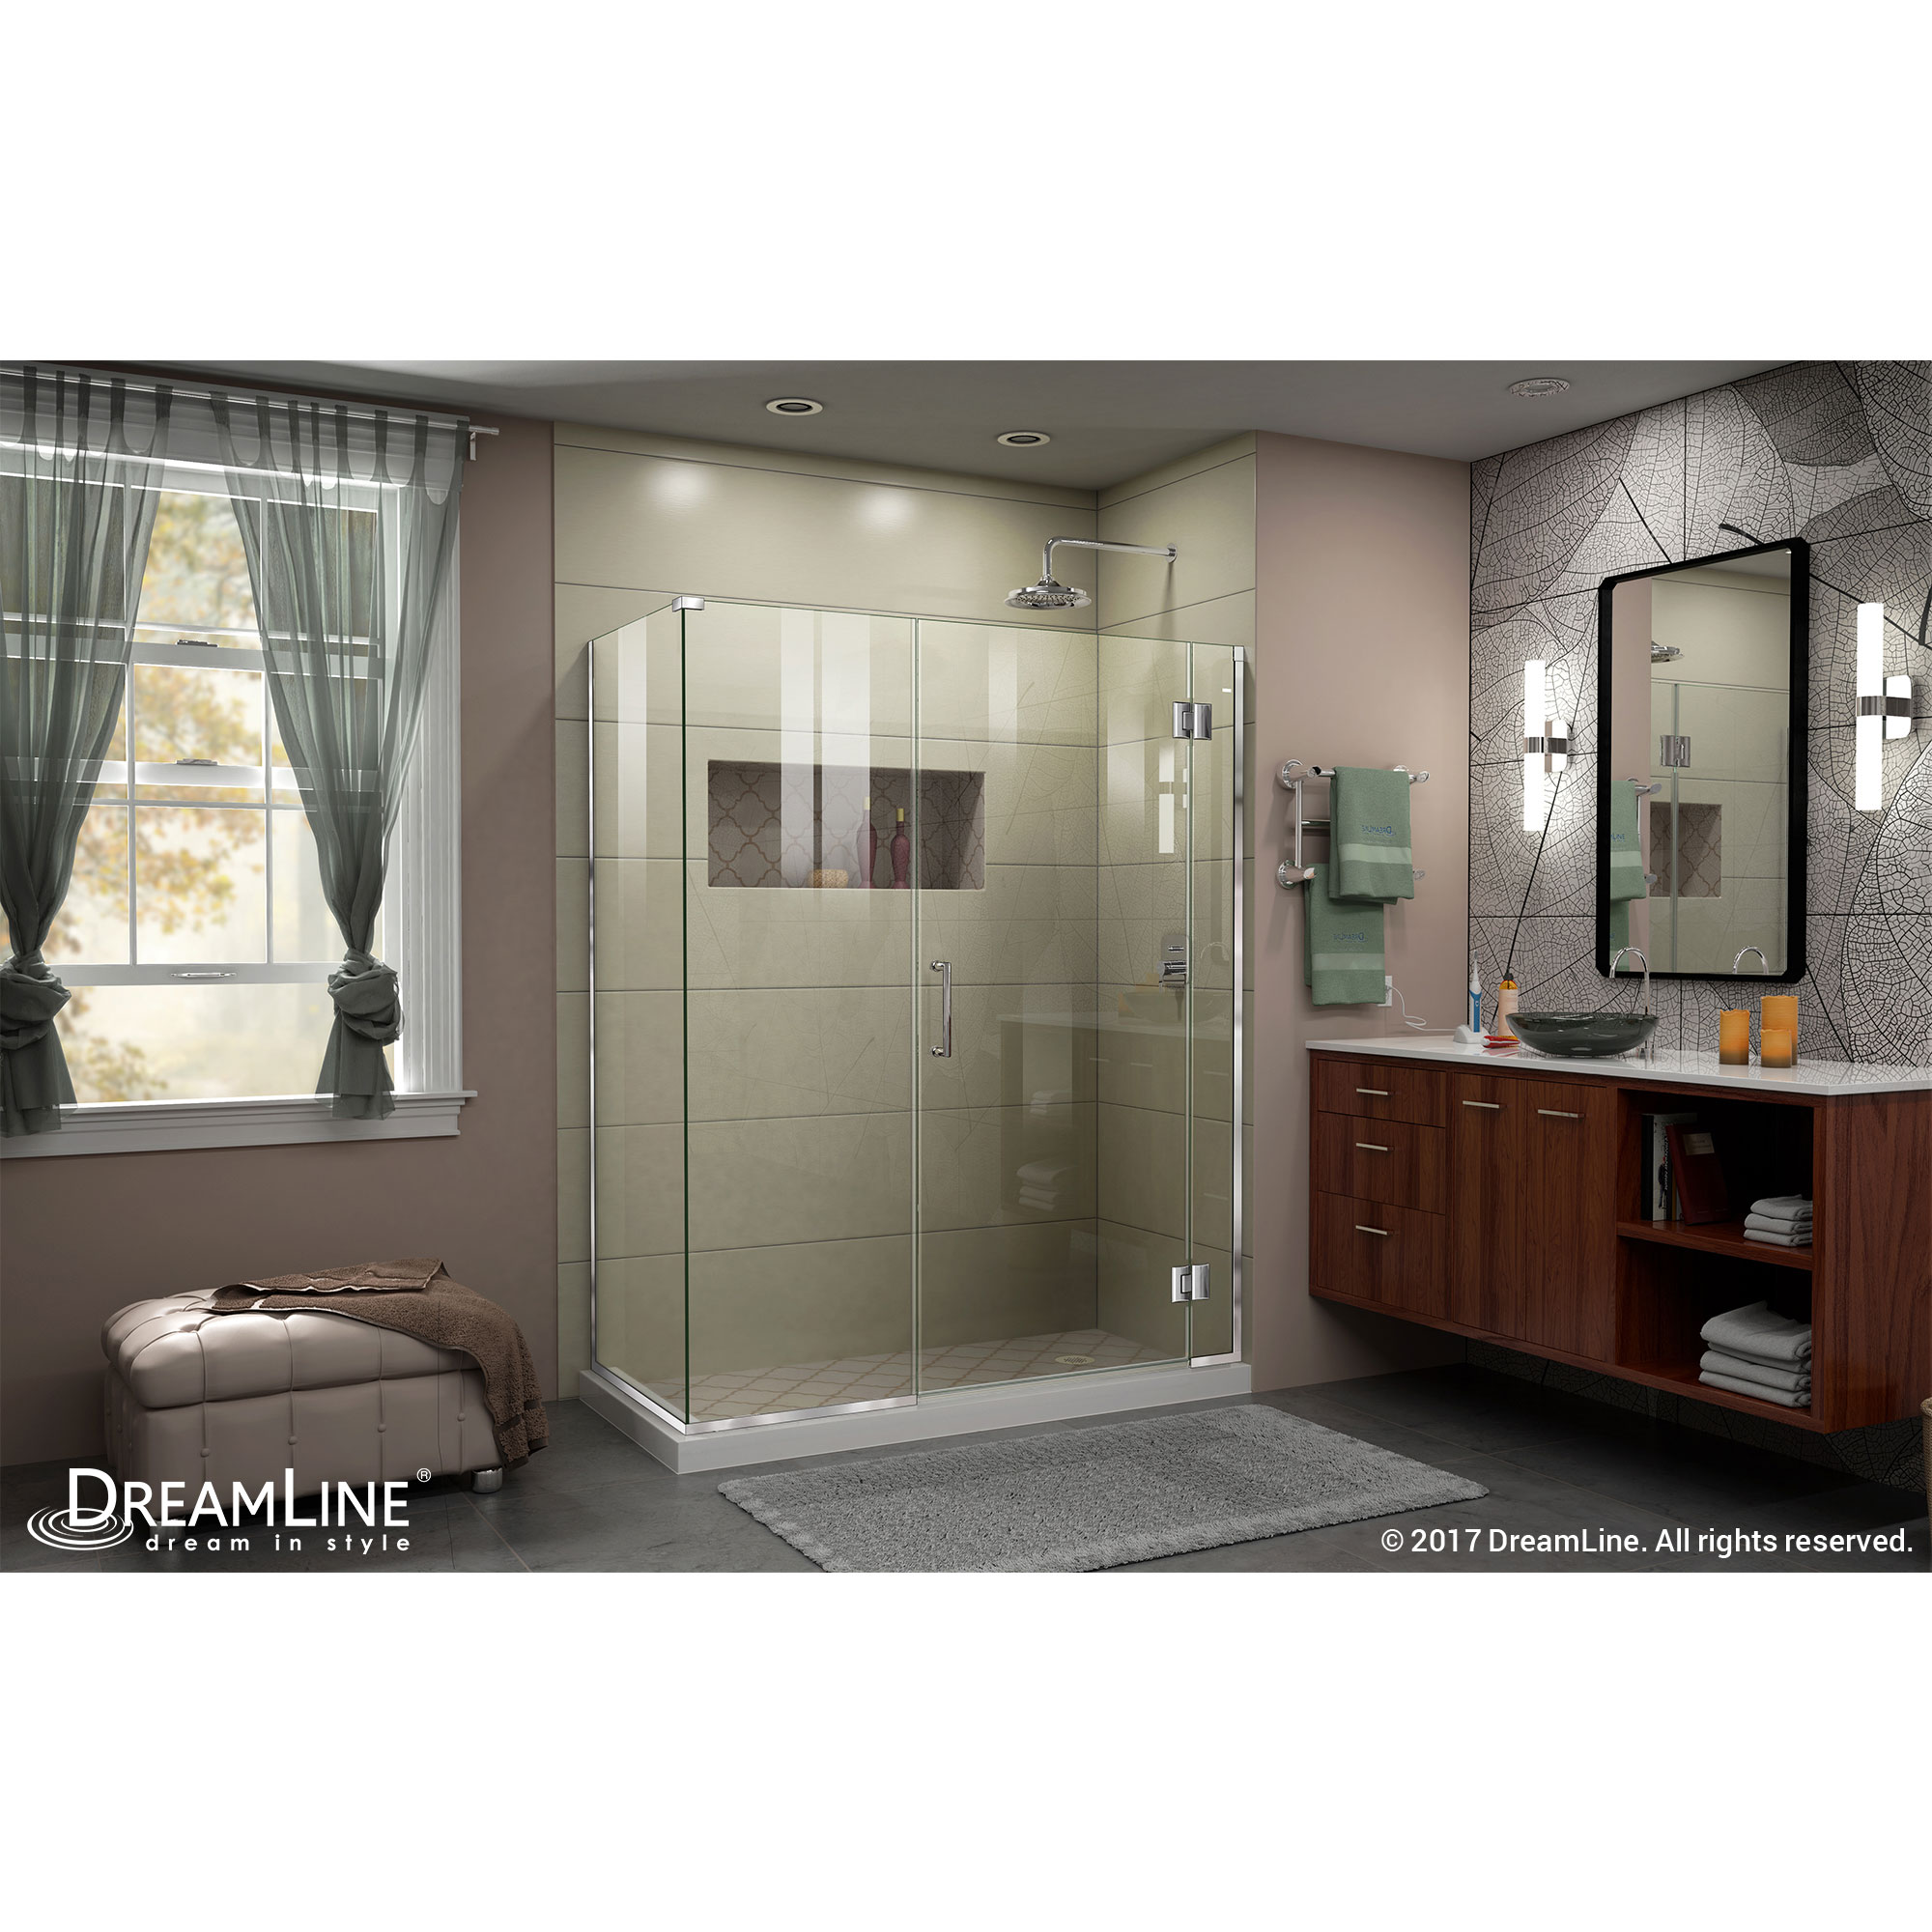 DreamLine Unidoor-X 58 in. W x 30 3/8 in. D x 72 in. H Frameless Hinged Shower Enclosure in Chrome